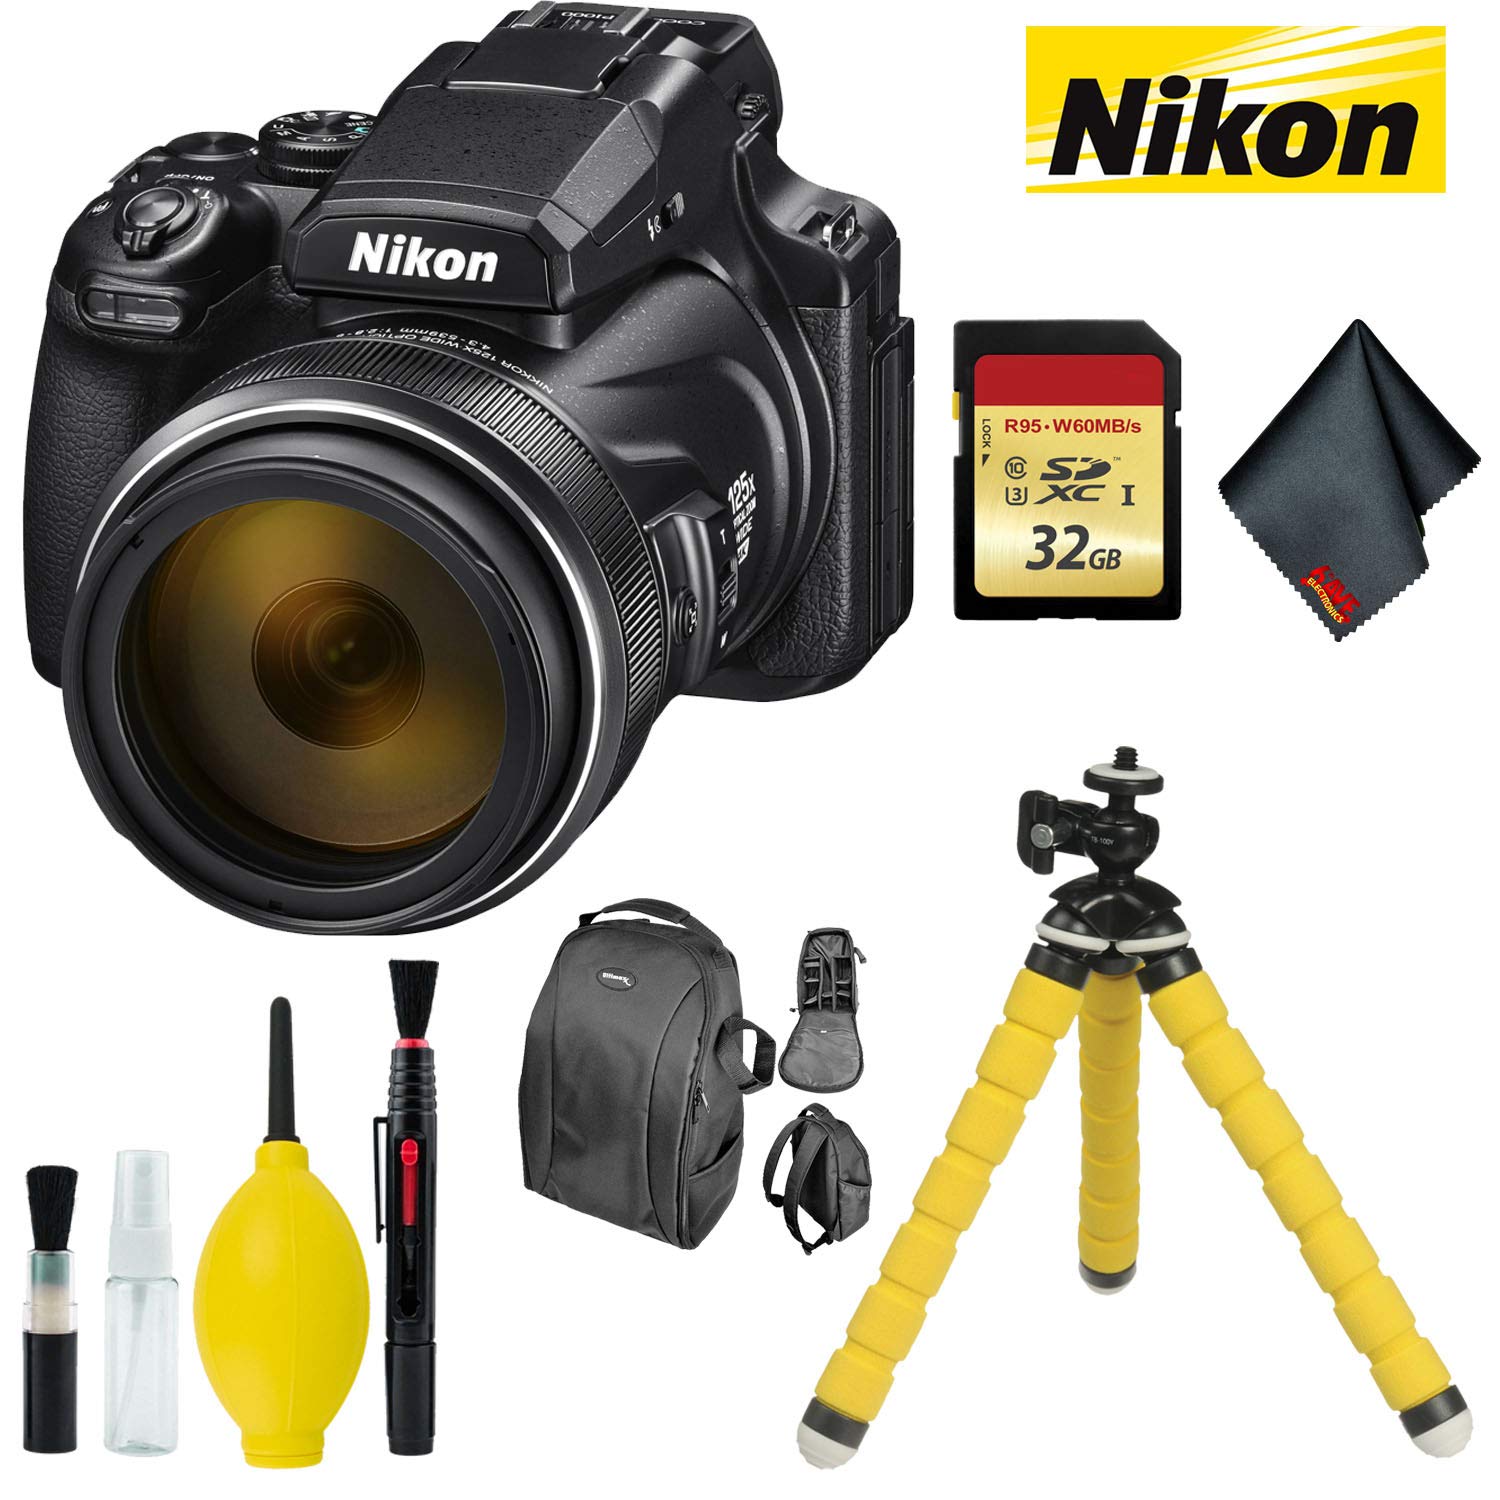 Nikon COOLPIX P1000 Digital Camera with 32GB Memory Card, Pro Sling Backpack, Flexible Tripod, and Cleaning Kit